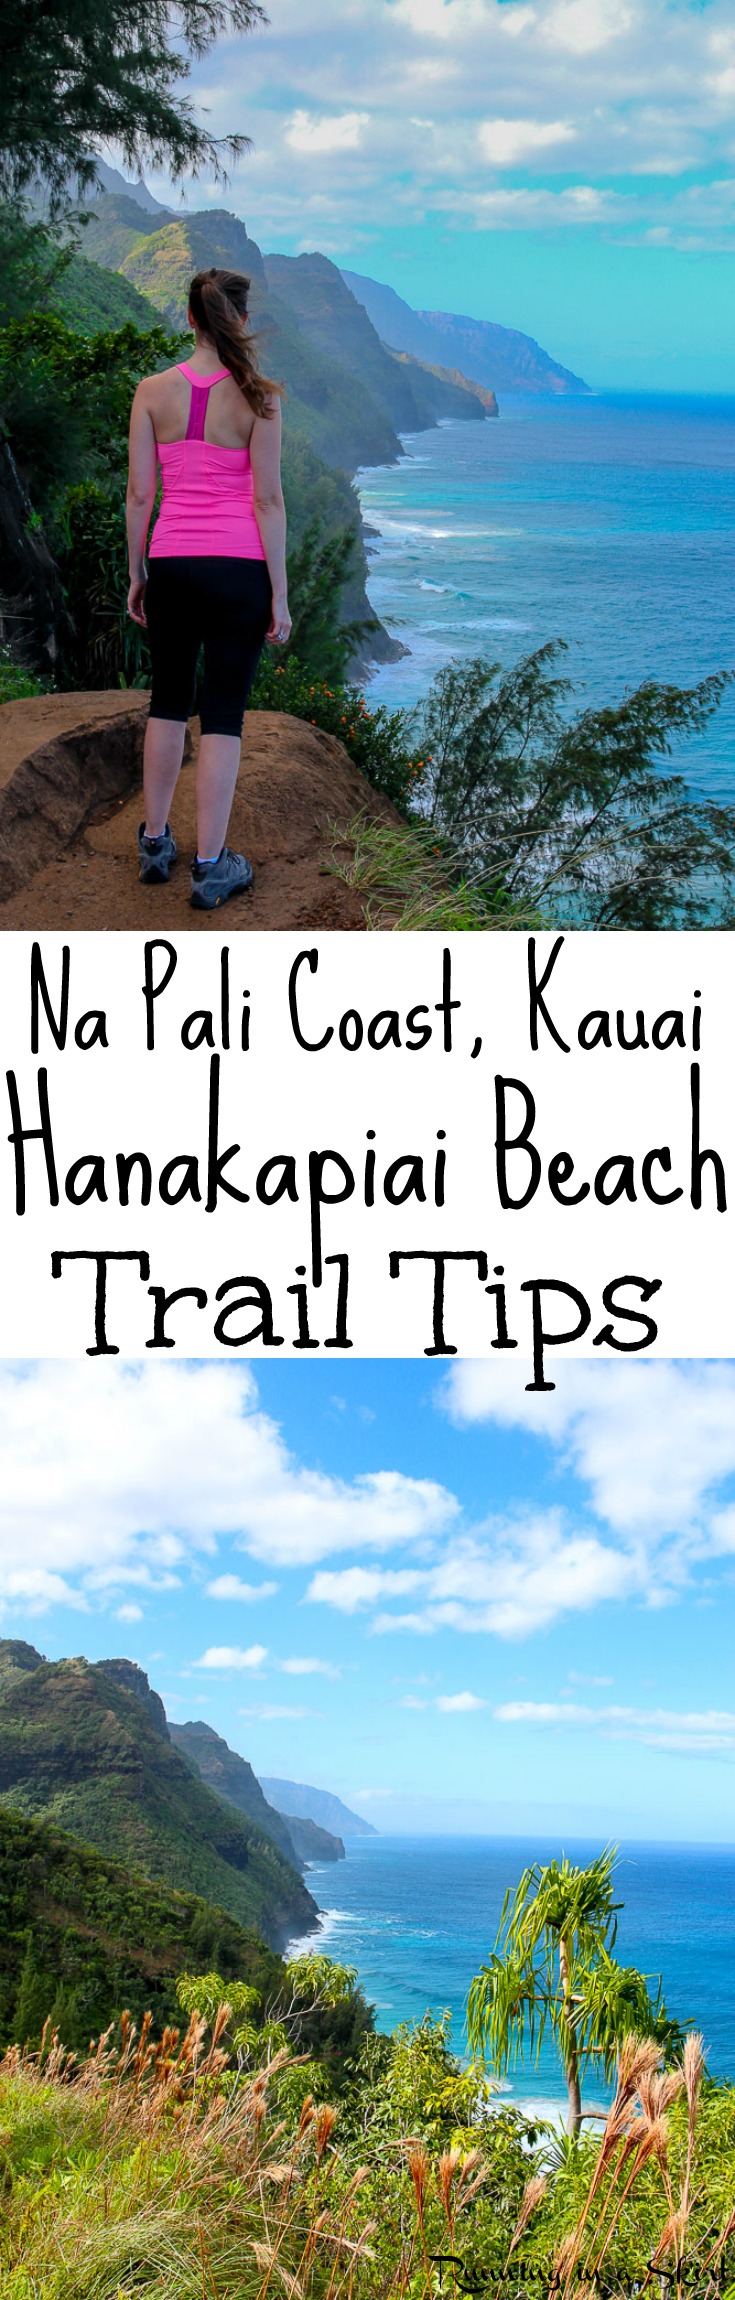 Tips for the Hanakapiai Trail on the Kalalau Trail in Kauai. This is one of the most beautiful hiking trails in Kauai, if not all of Hawaii. If you are doing any Kauai Hiking on the north shore and up for an adventure you have to do this! Includes photography of the entire journey and take aways. Total bucket lists trips to Hanakapiai Beach. / Running in a Skirt via @juliewunder